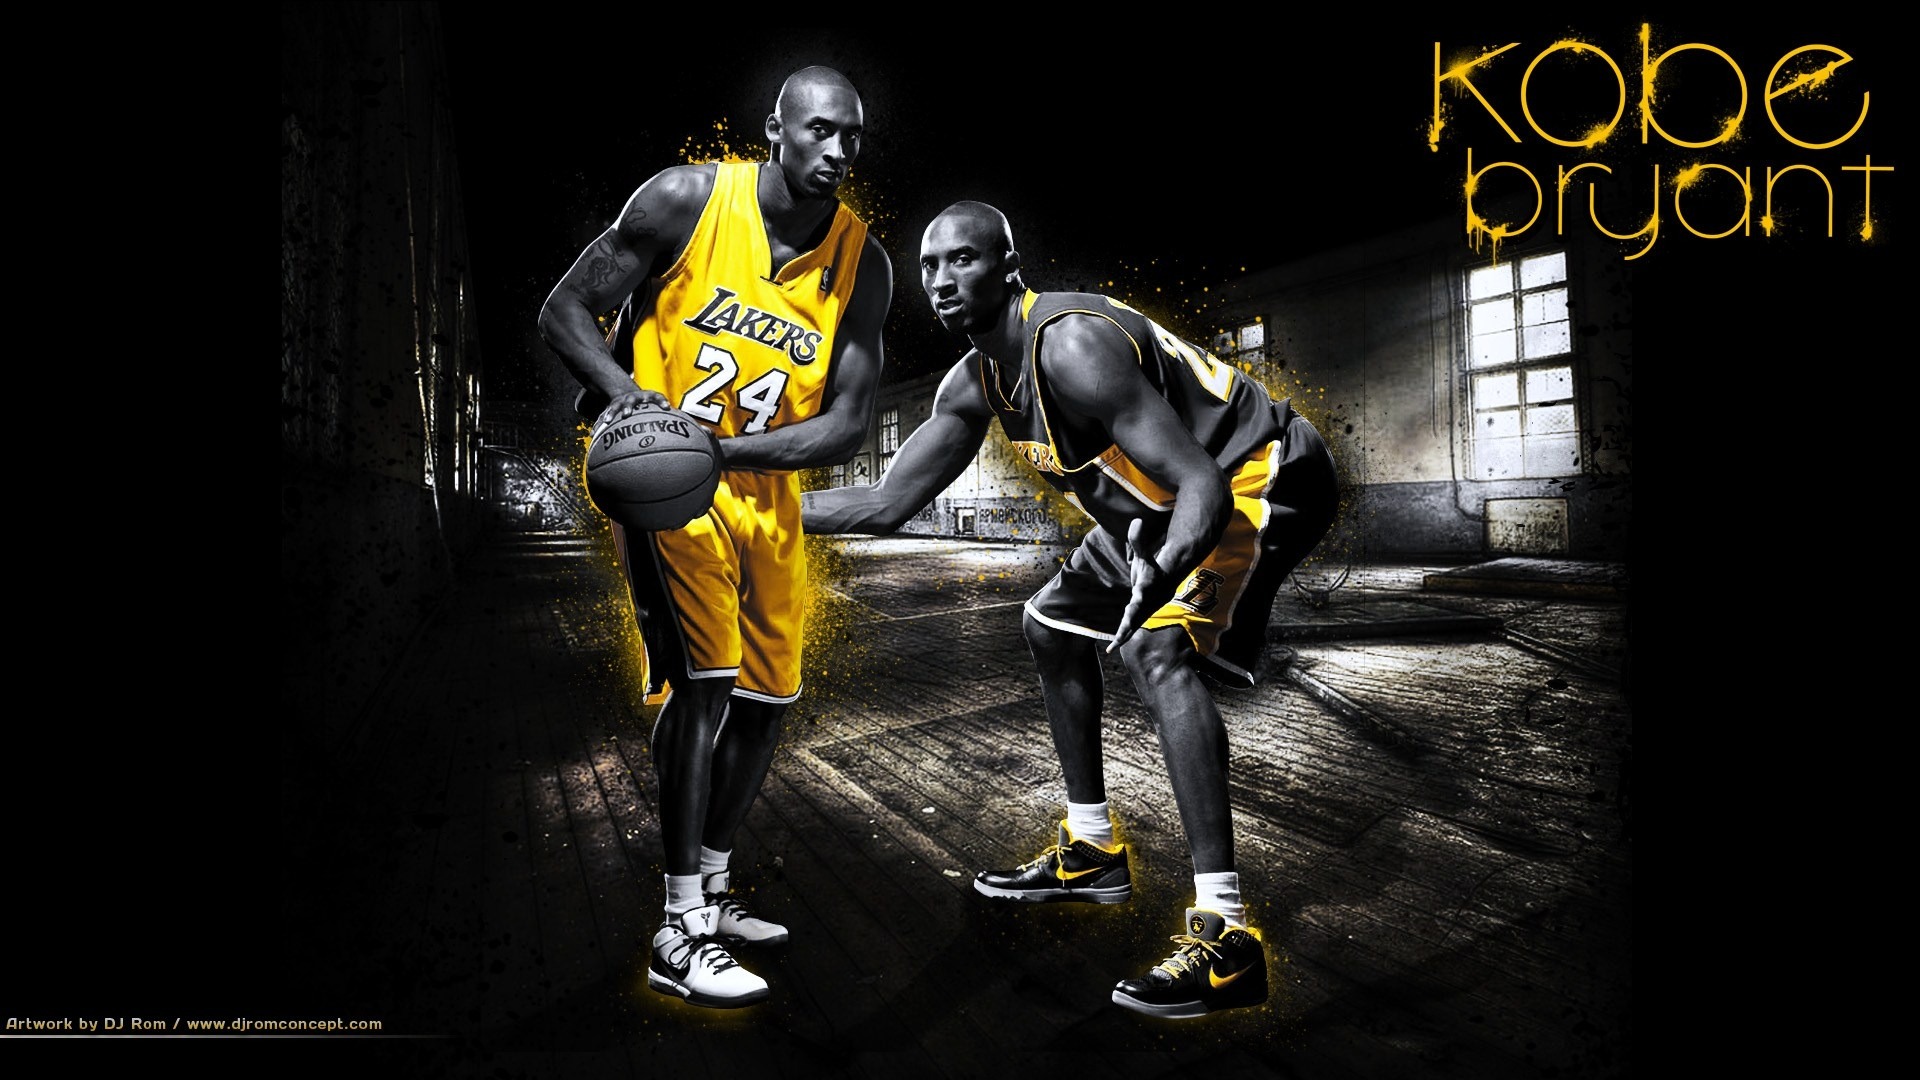 Los Angeles Lakers Wallpaper Background